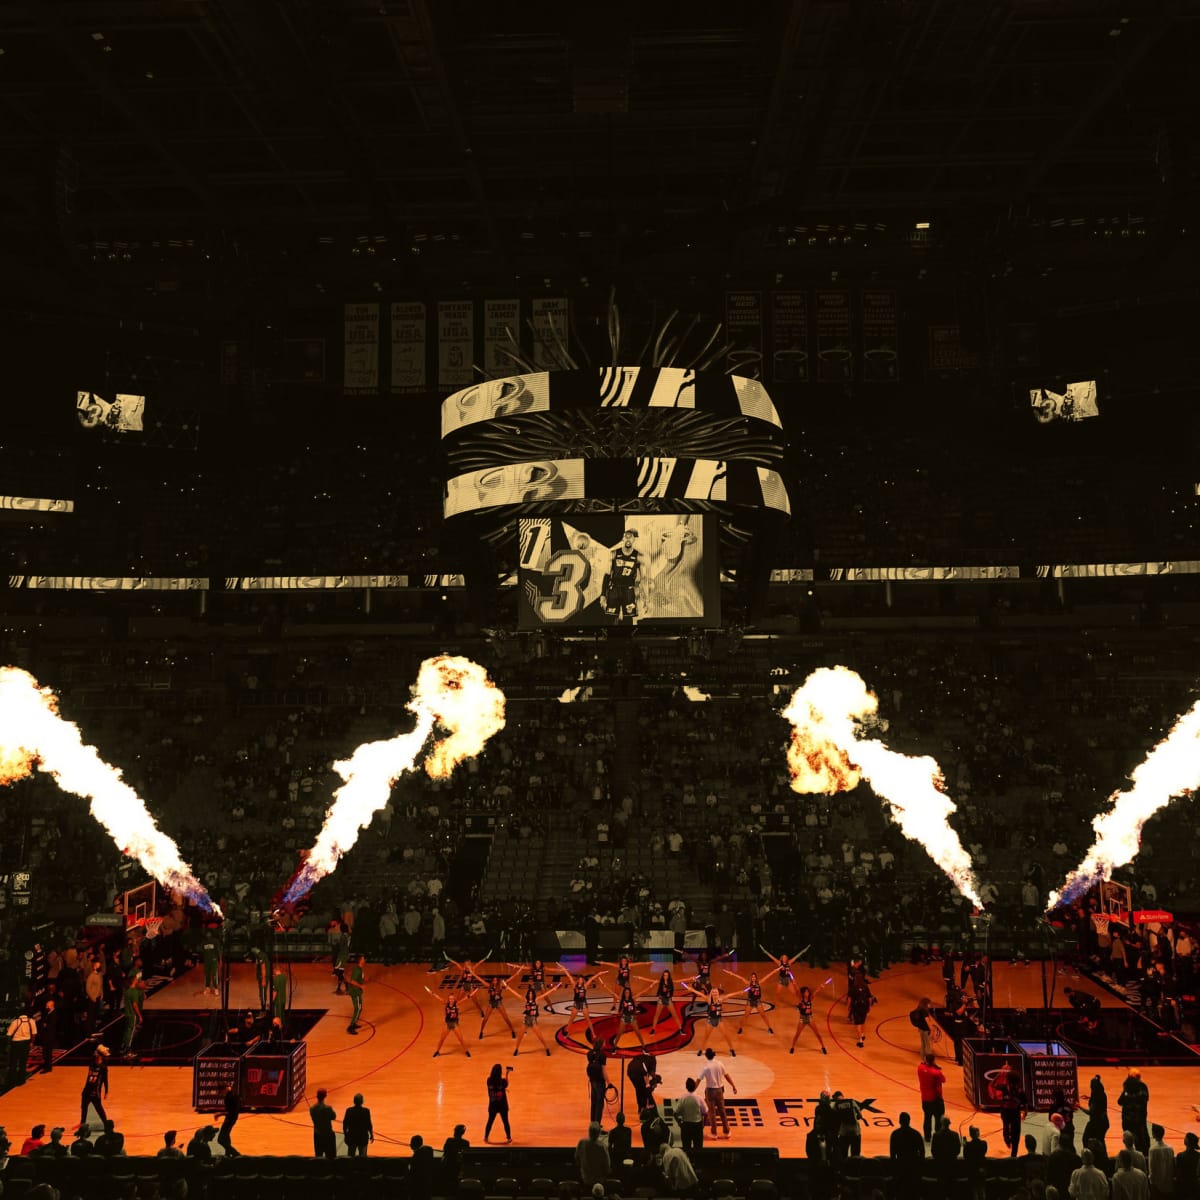 Miami Heat's AmericanAirlines Arena now named FTX Arena